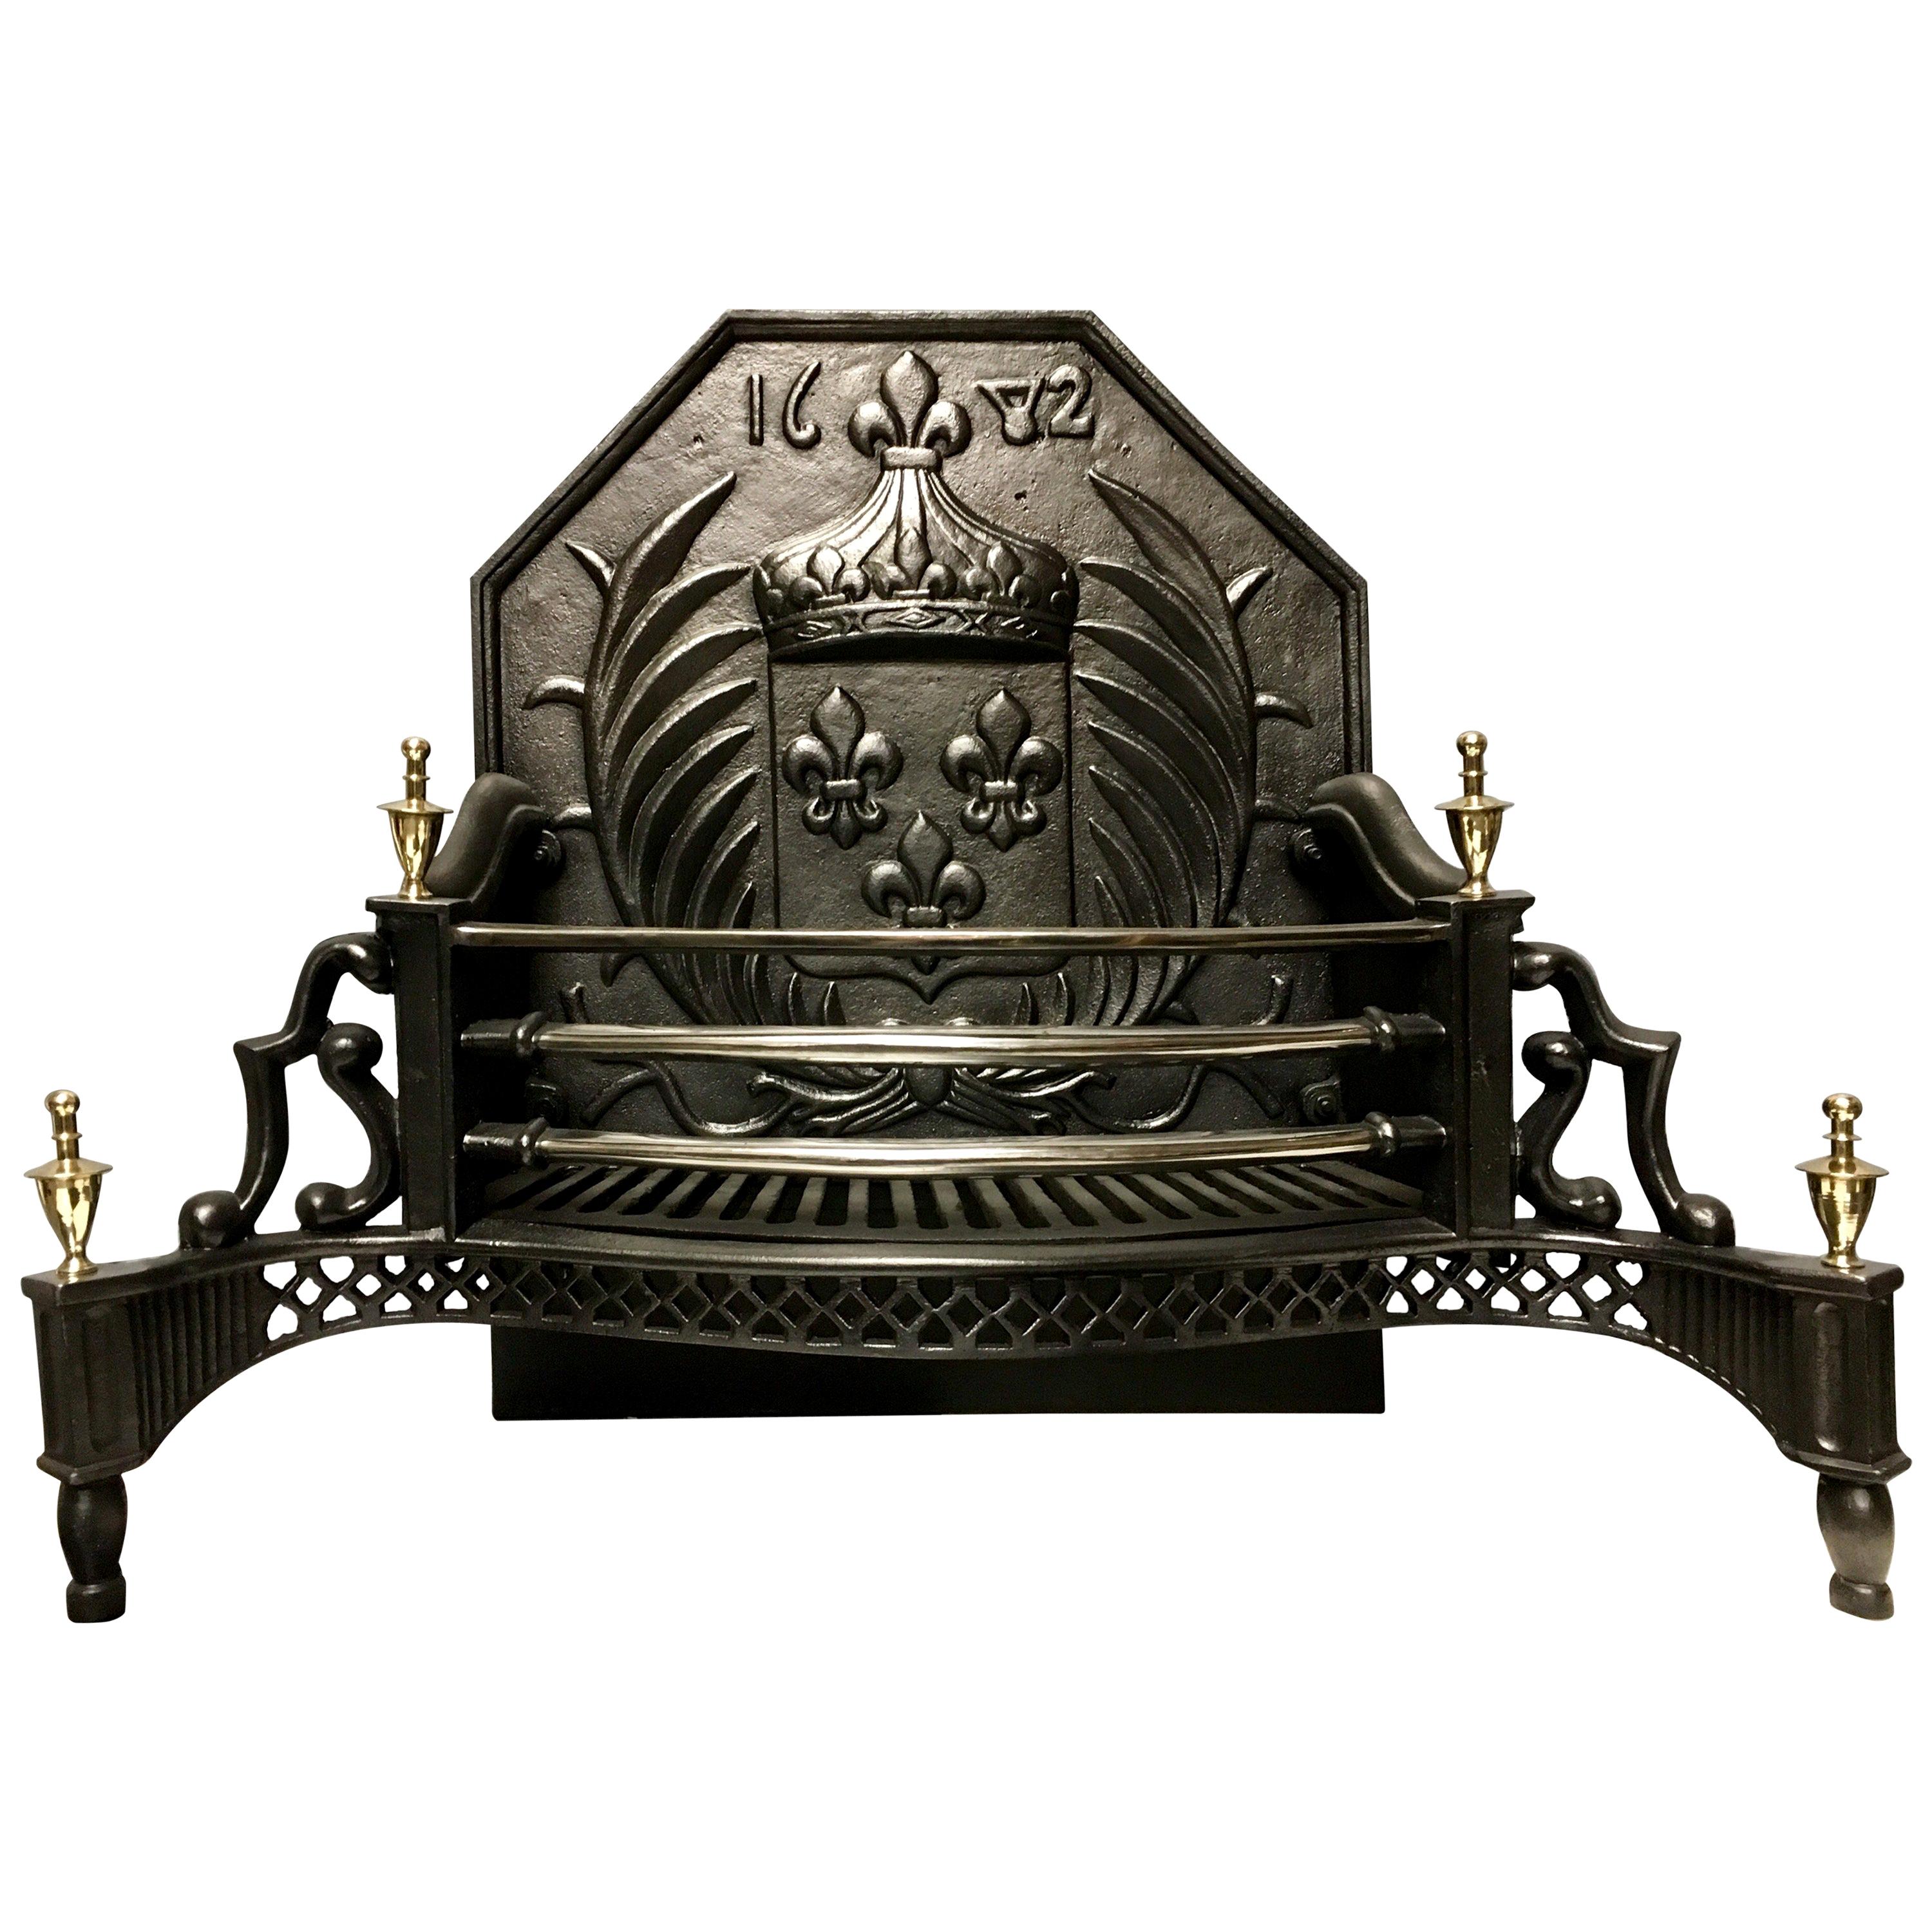 Period Cast Iron and Brass Victorian Style Fire Grate Basket